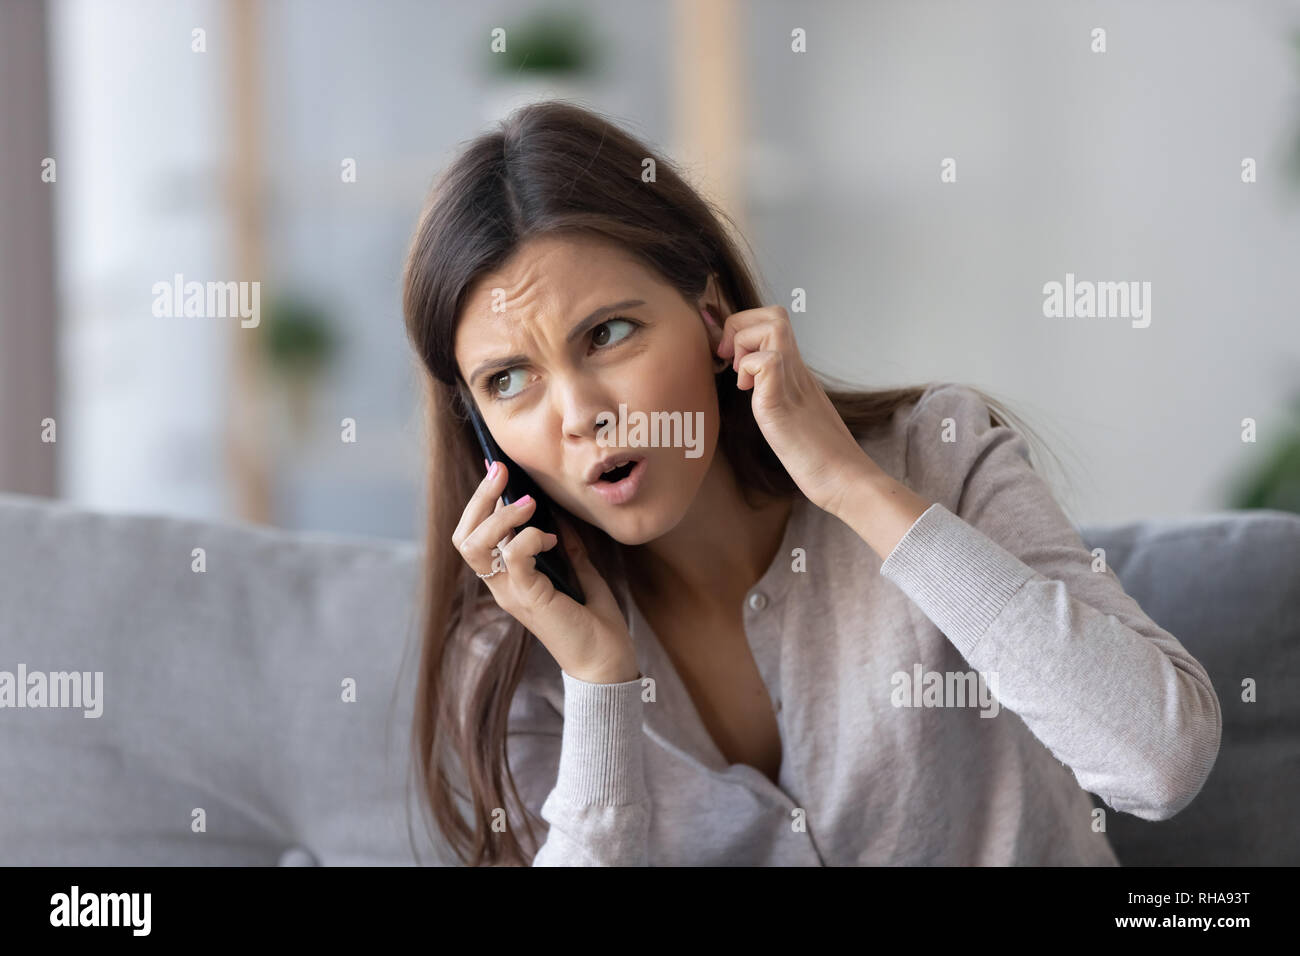 Annoyed young woman talking on phone not hearing bad signal Stock Photo